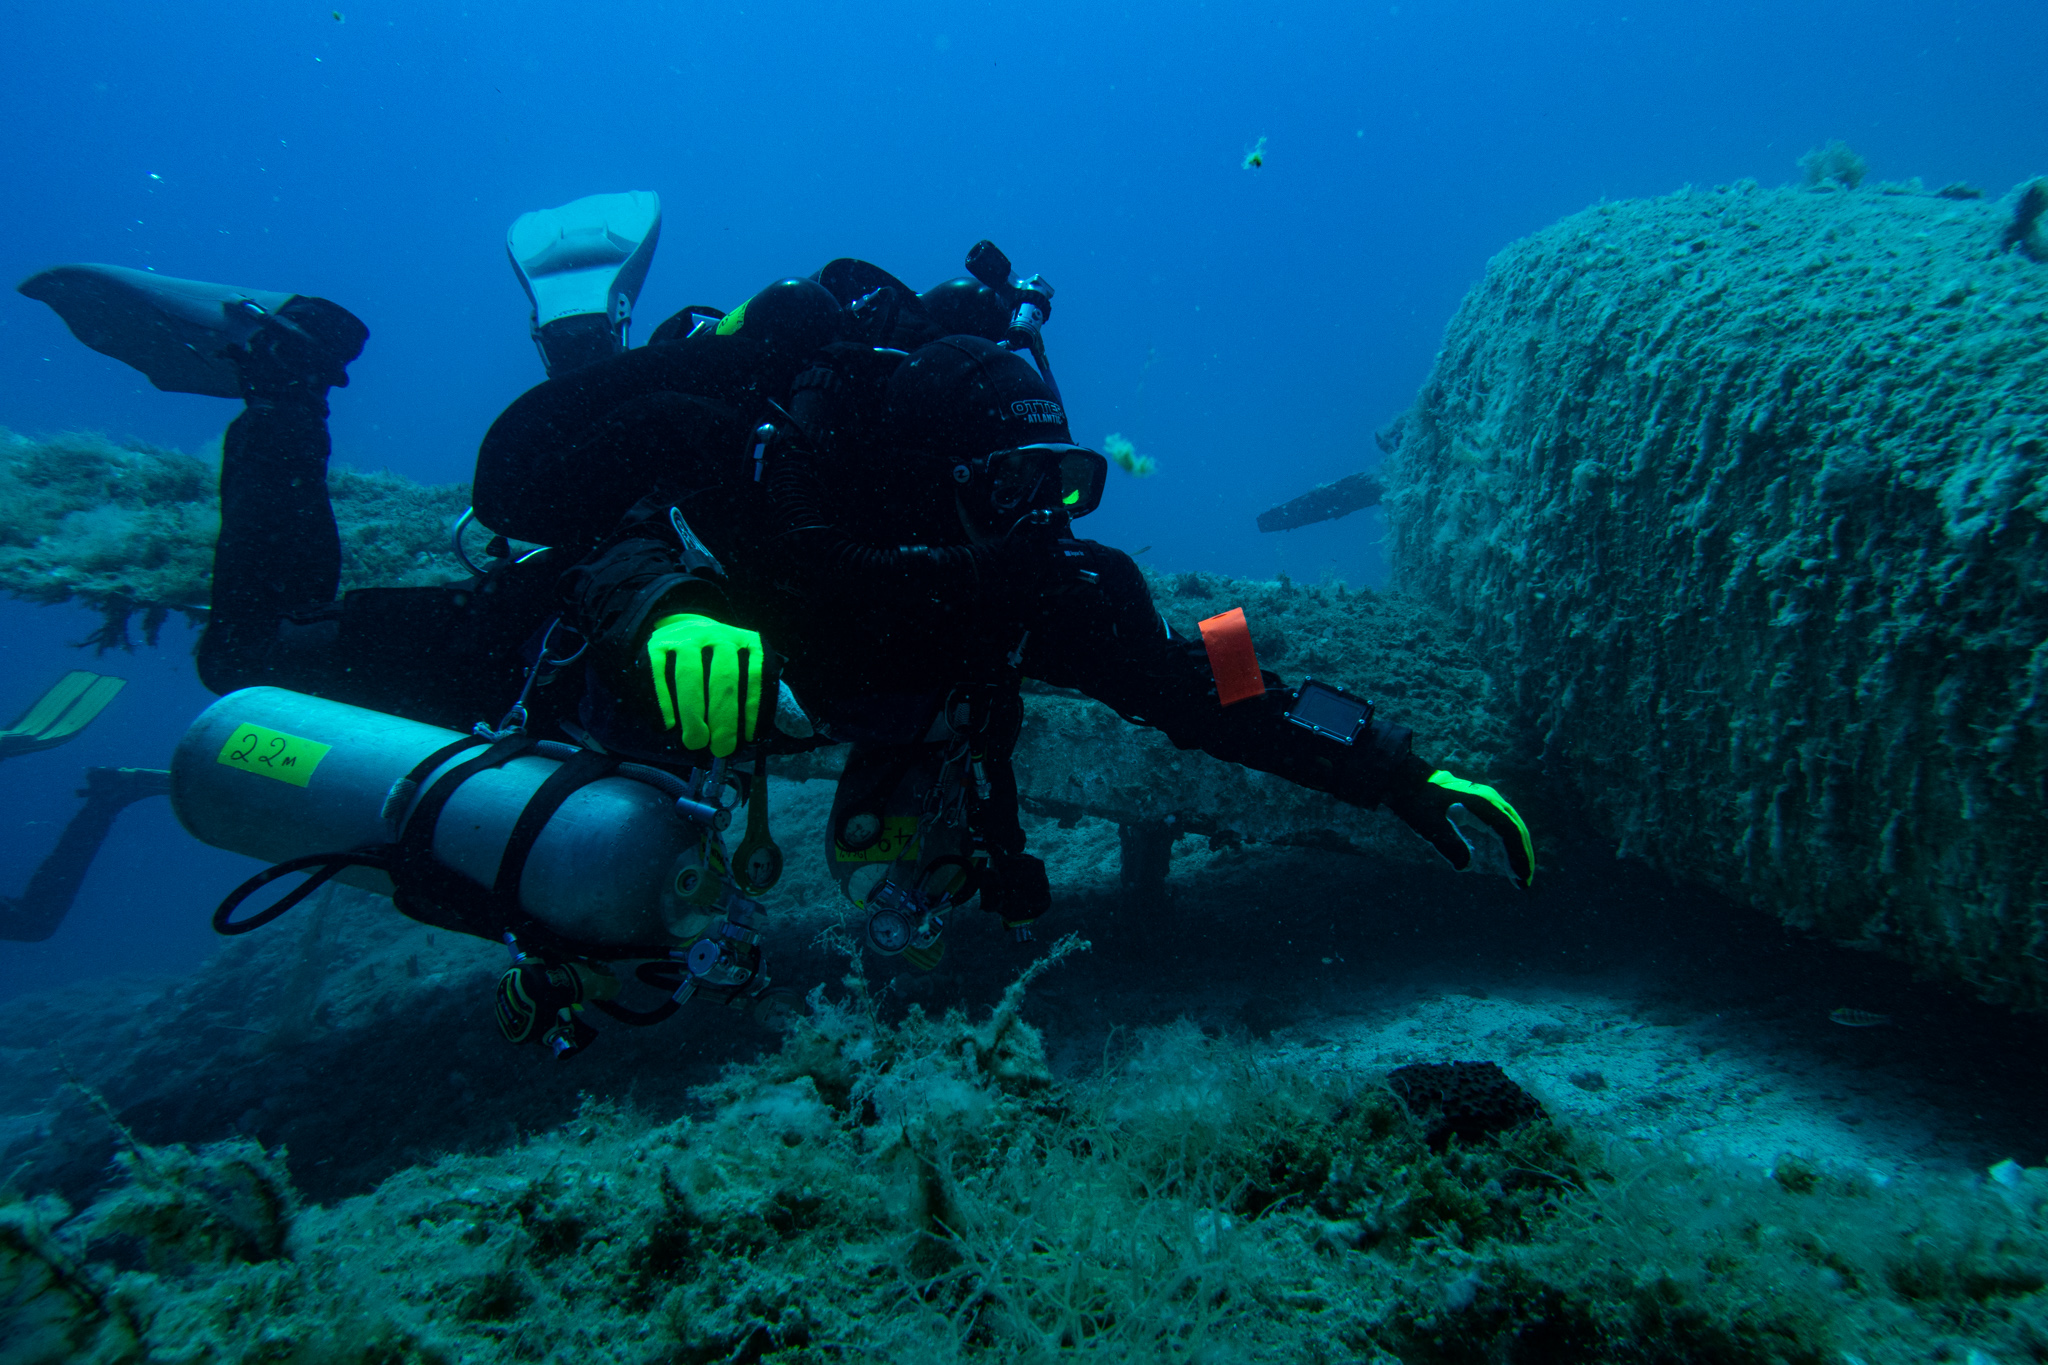 hovering rebreather diver next to a piper airplane wreck